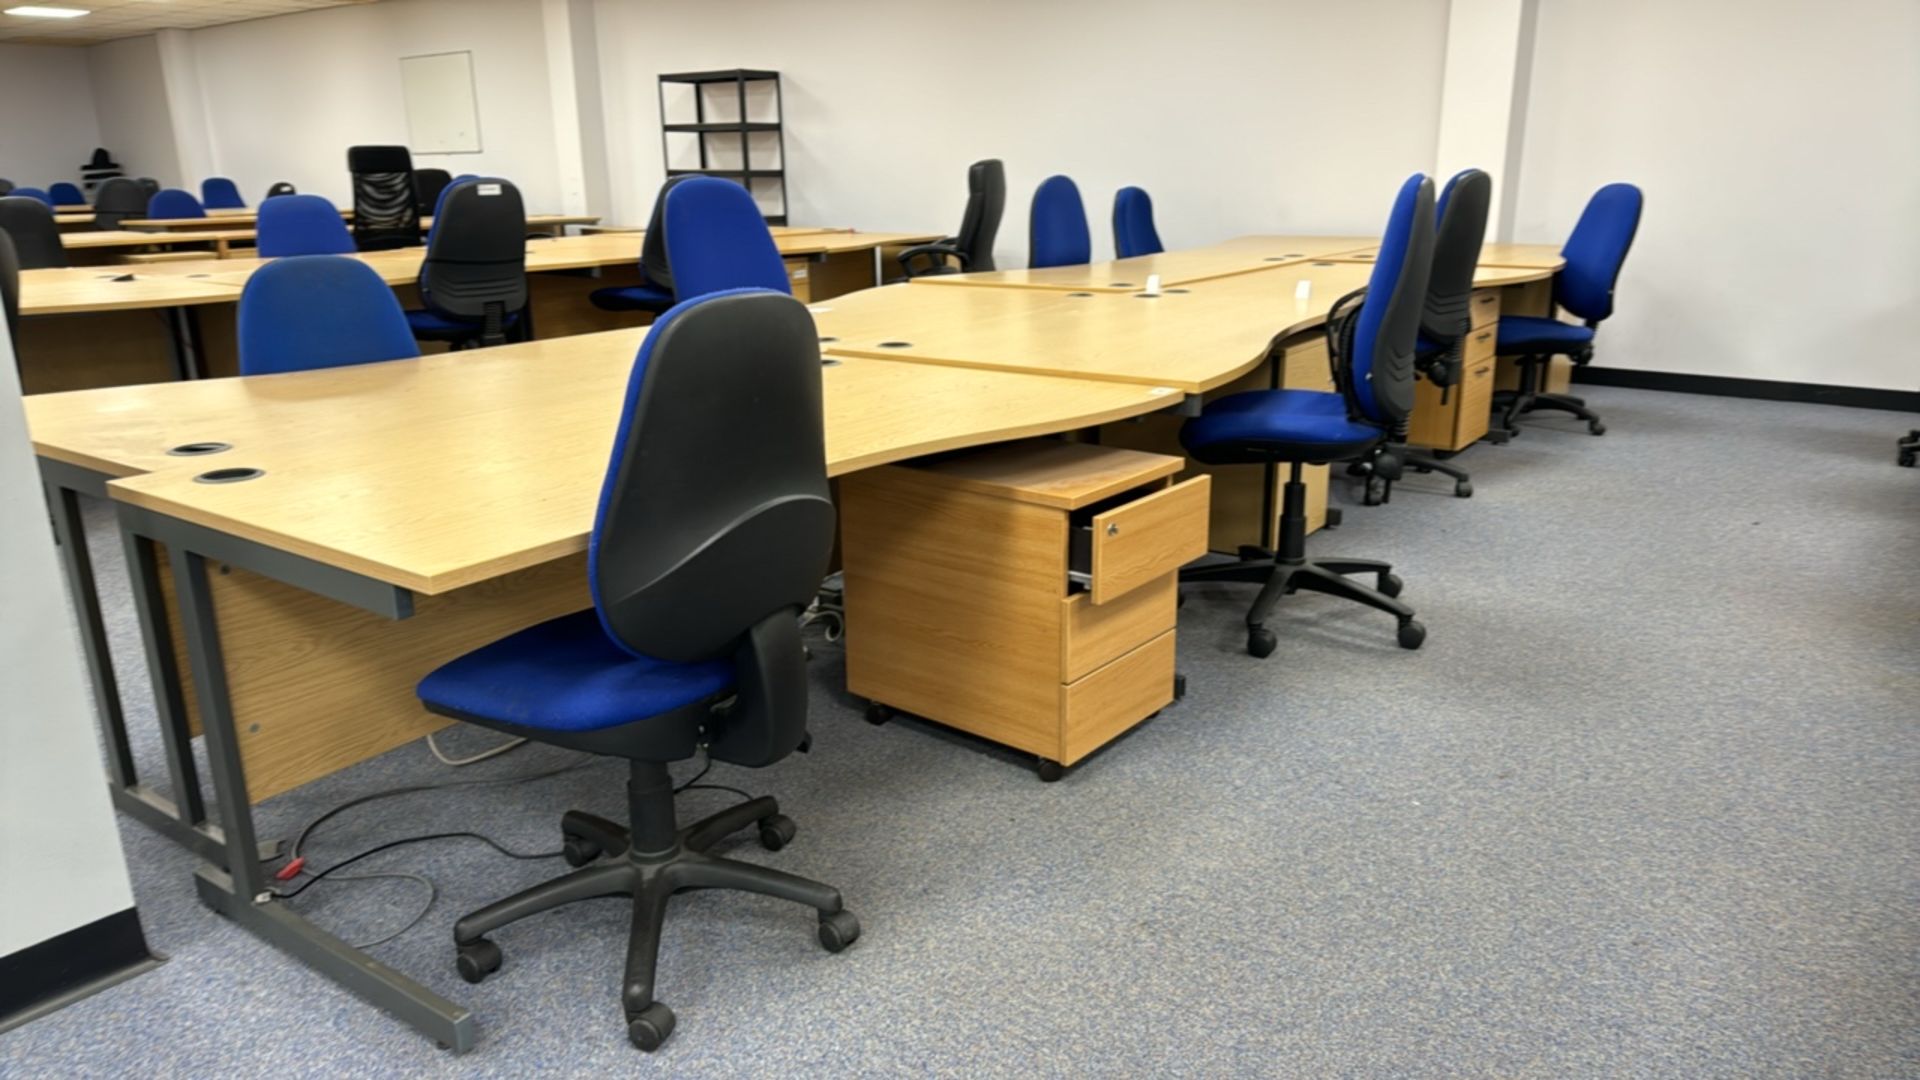 Wooden Effect Office Desks x8 With Office Chairs x8 - Image 5 of 5